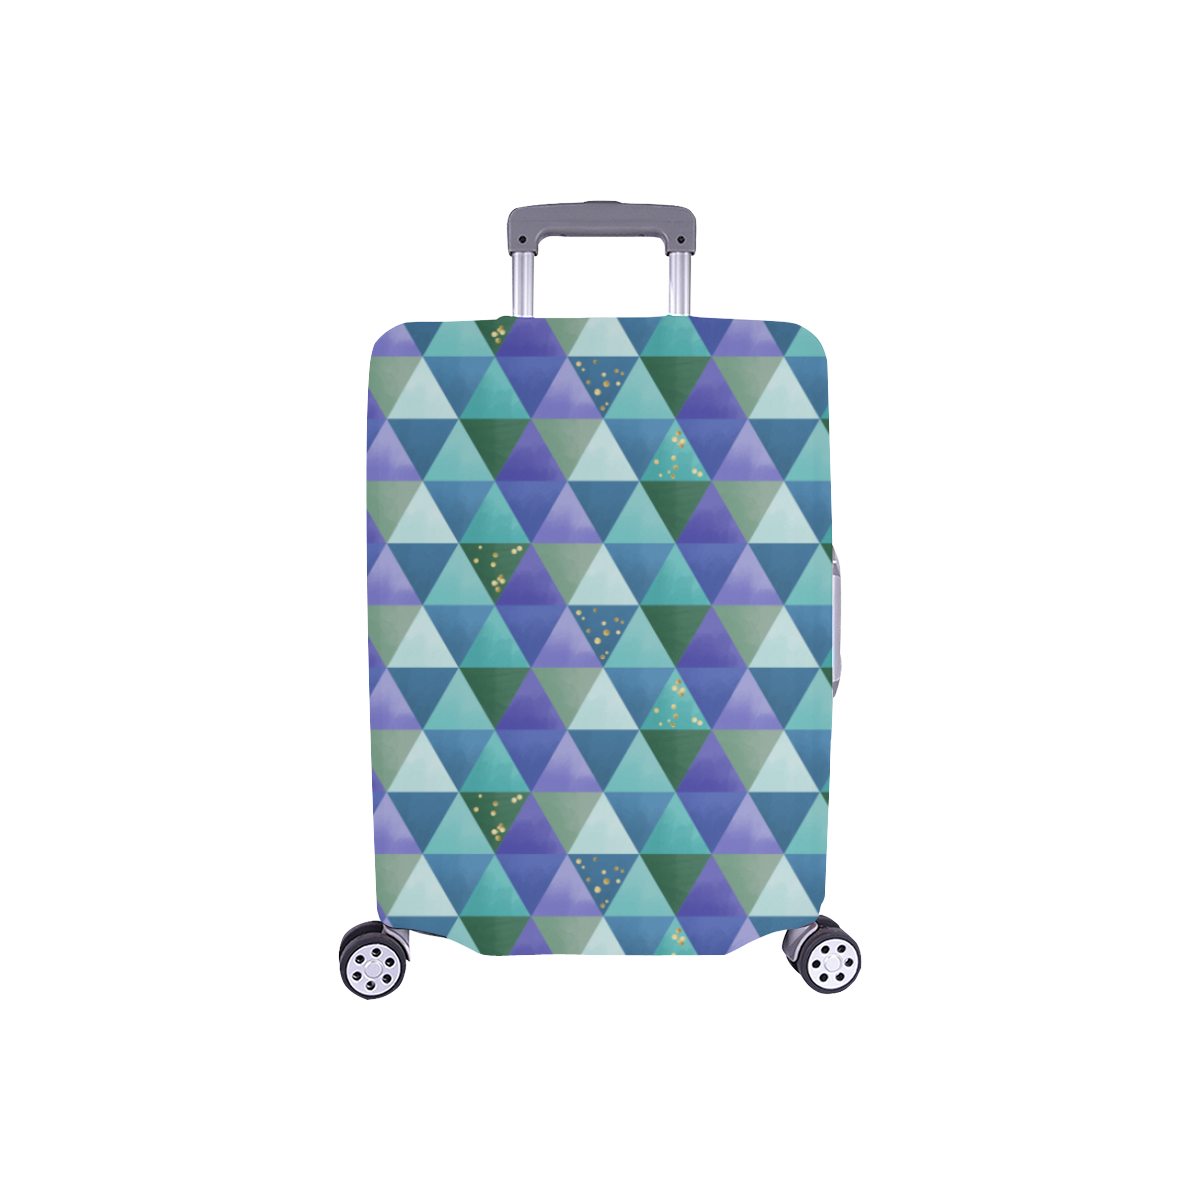 Triangle Pattern - Blue Violet Teal Green Luggage Cover/Small 18"-21"